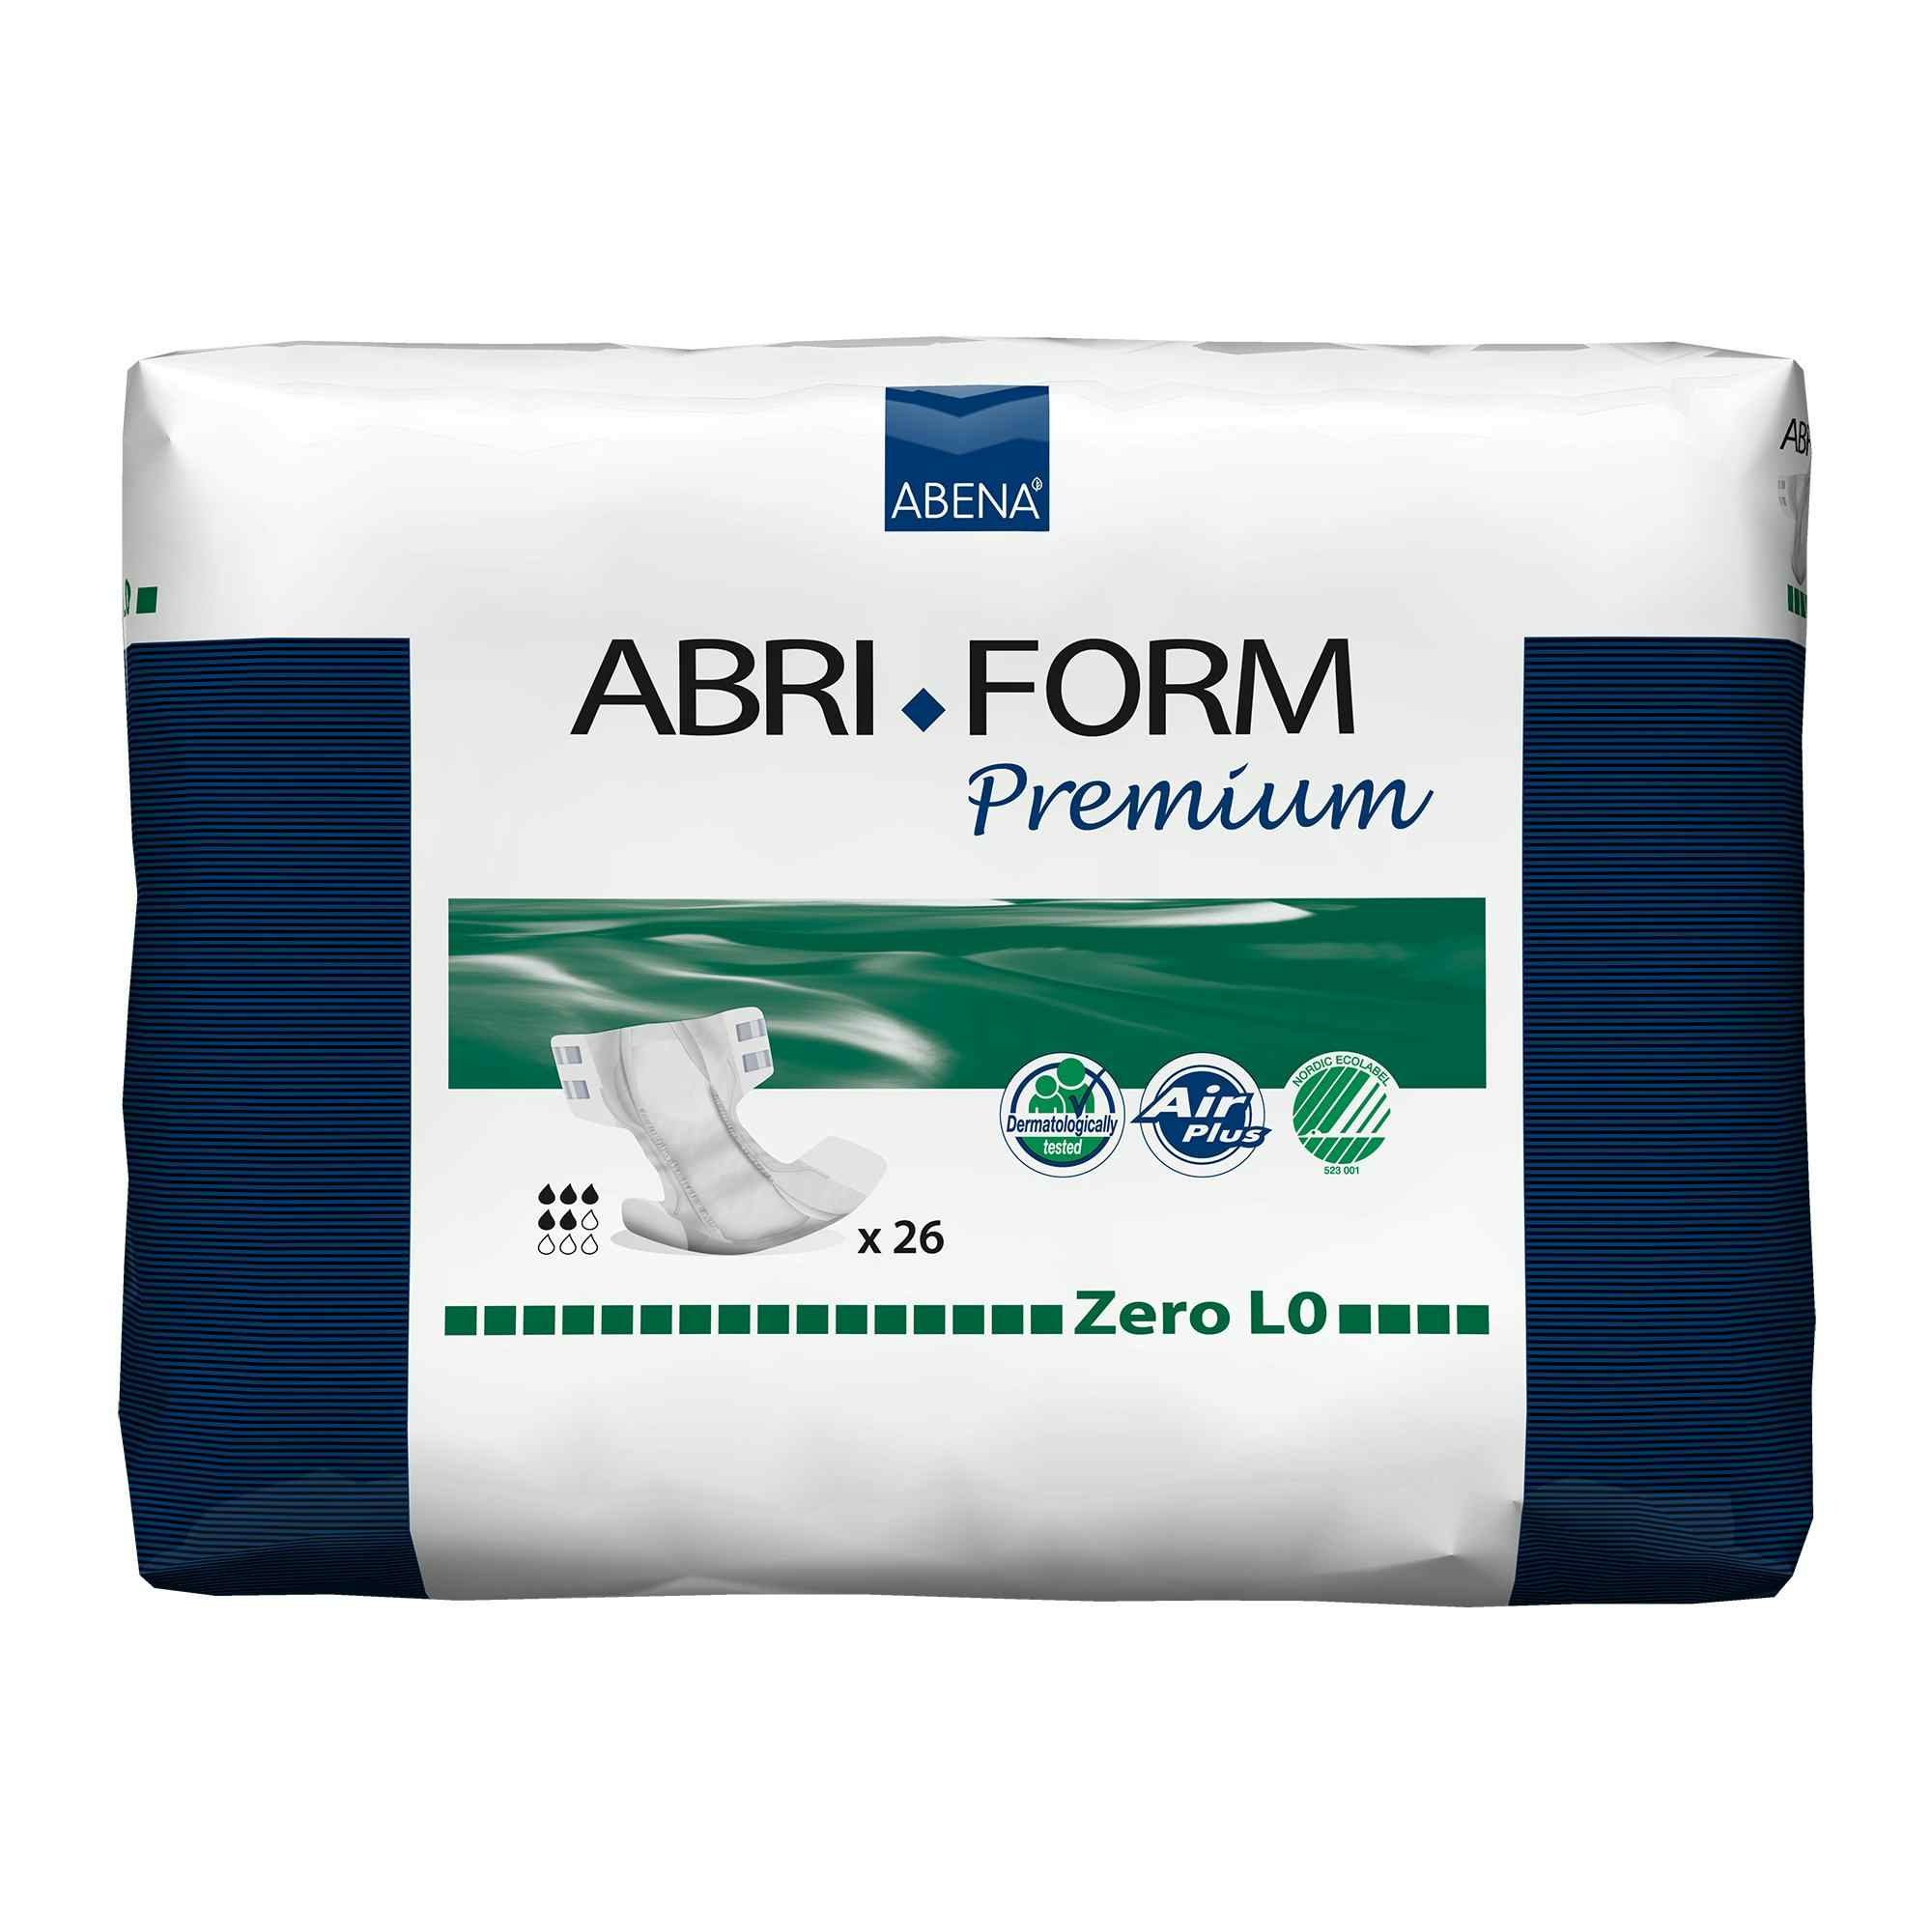 Abri-Form Premium L0 Unisex Adult Disposable Diaper with tabs, Heavy Absorbency, 43059, Large (40-60") - Case of 104 Diapers (4 Bags)